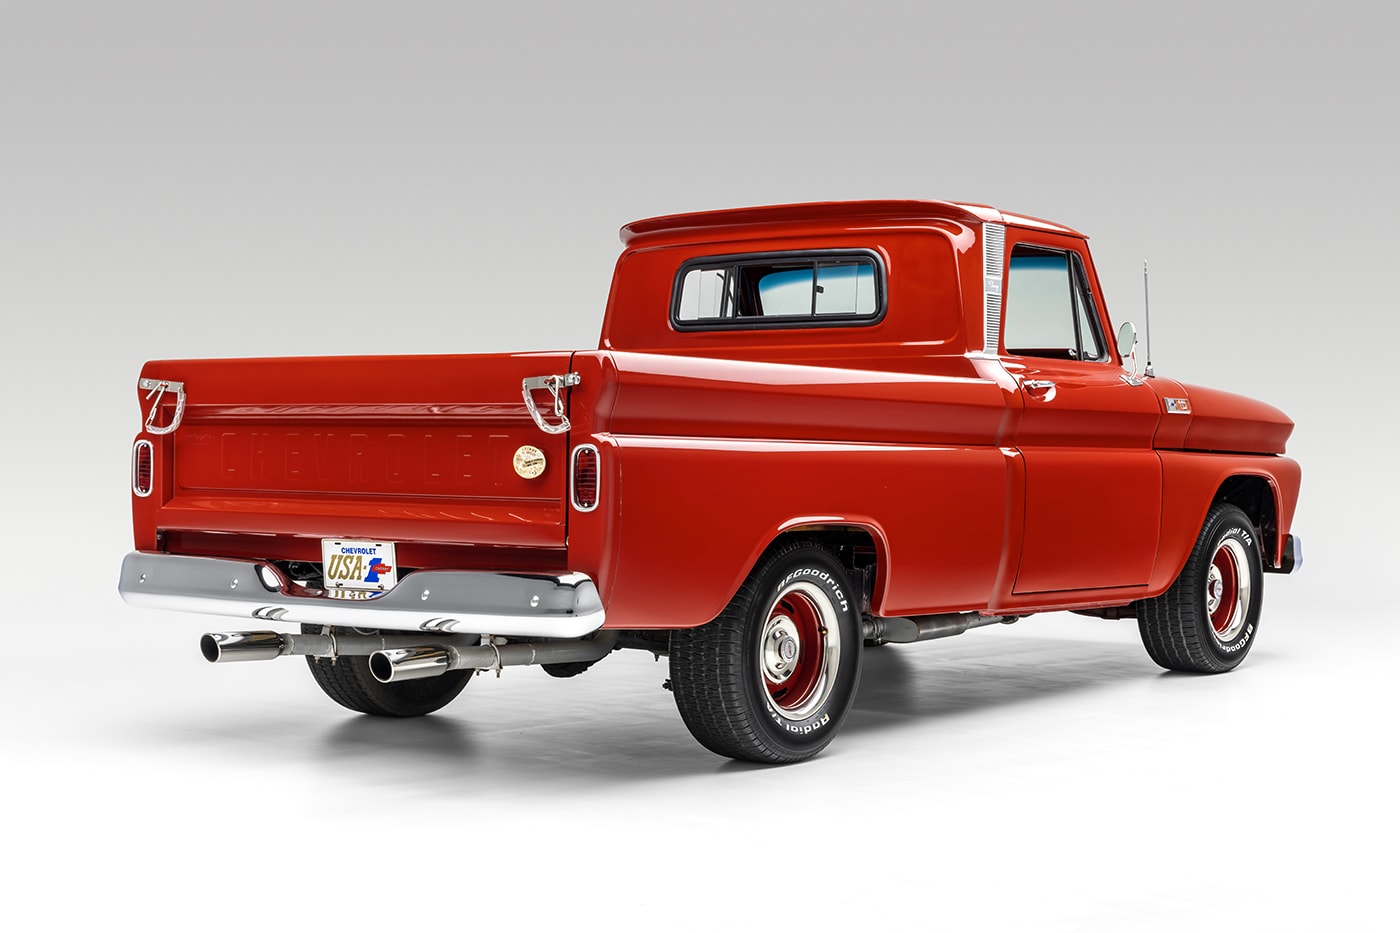 Cherry Los Angeles Holiday 2021 Raffle Announcement 1965 Chevrolet C10 Pickup Truck